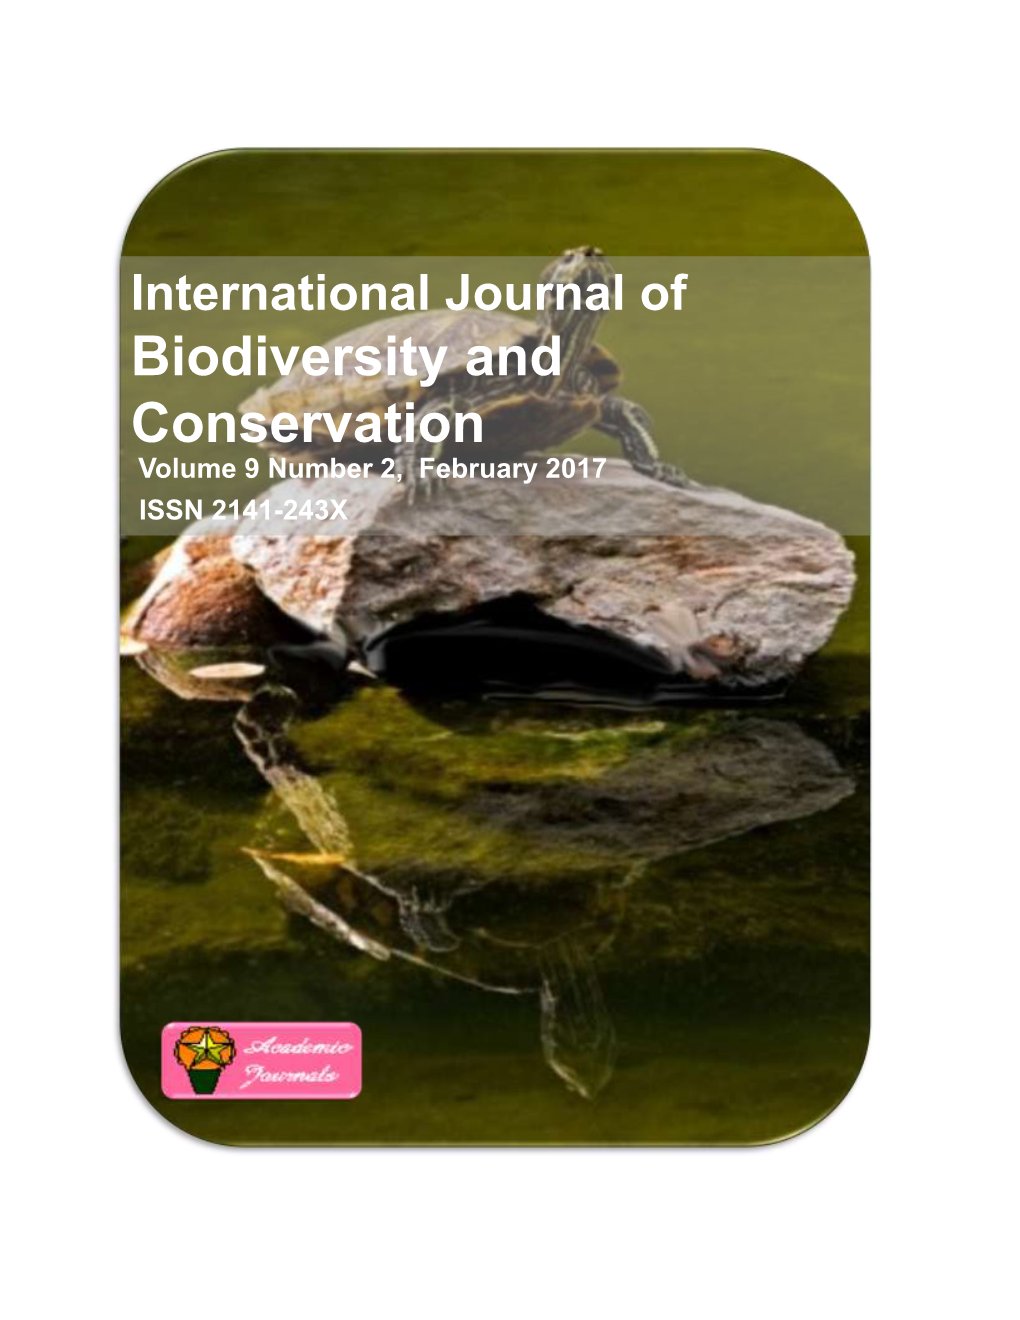 Biodiversity and Conservation Volume 9 Number 2, February 2017 ISSN 2141-243X